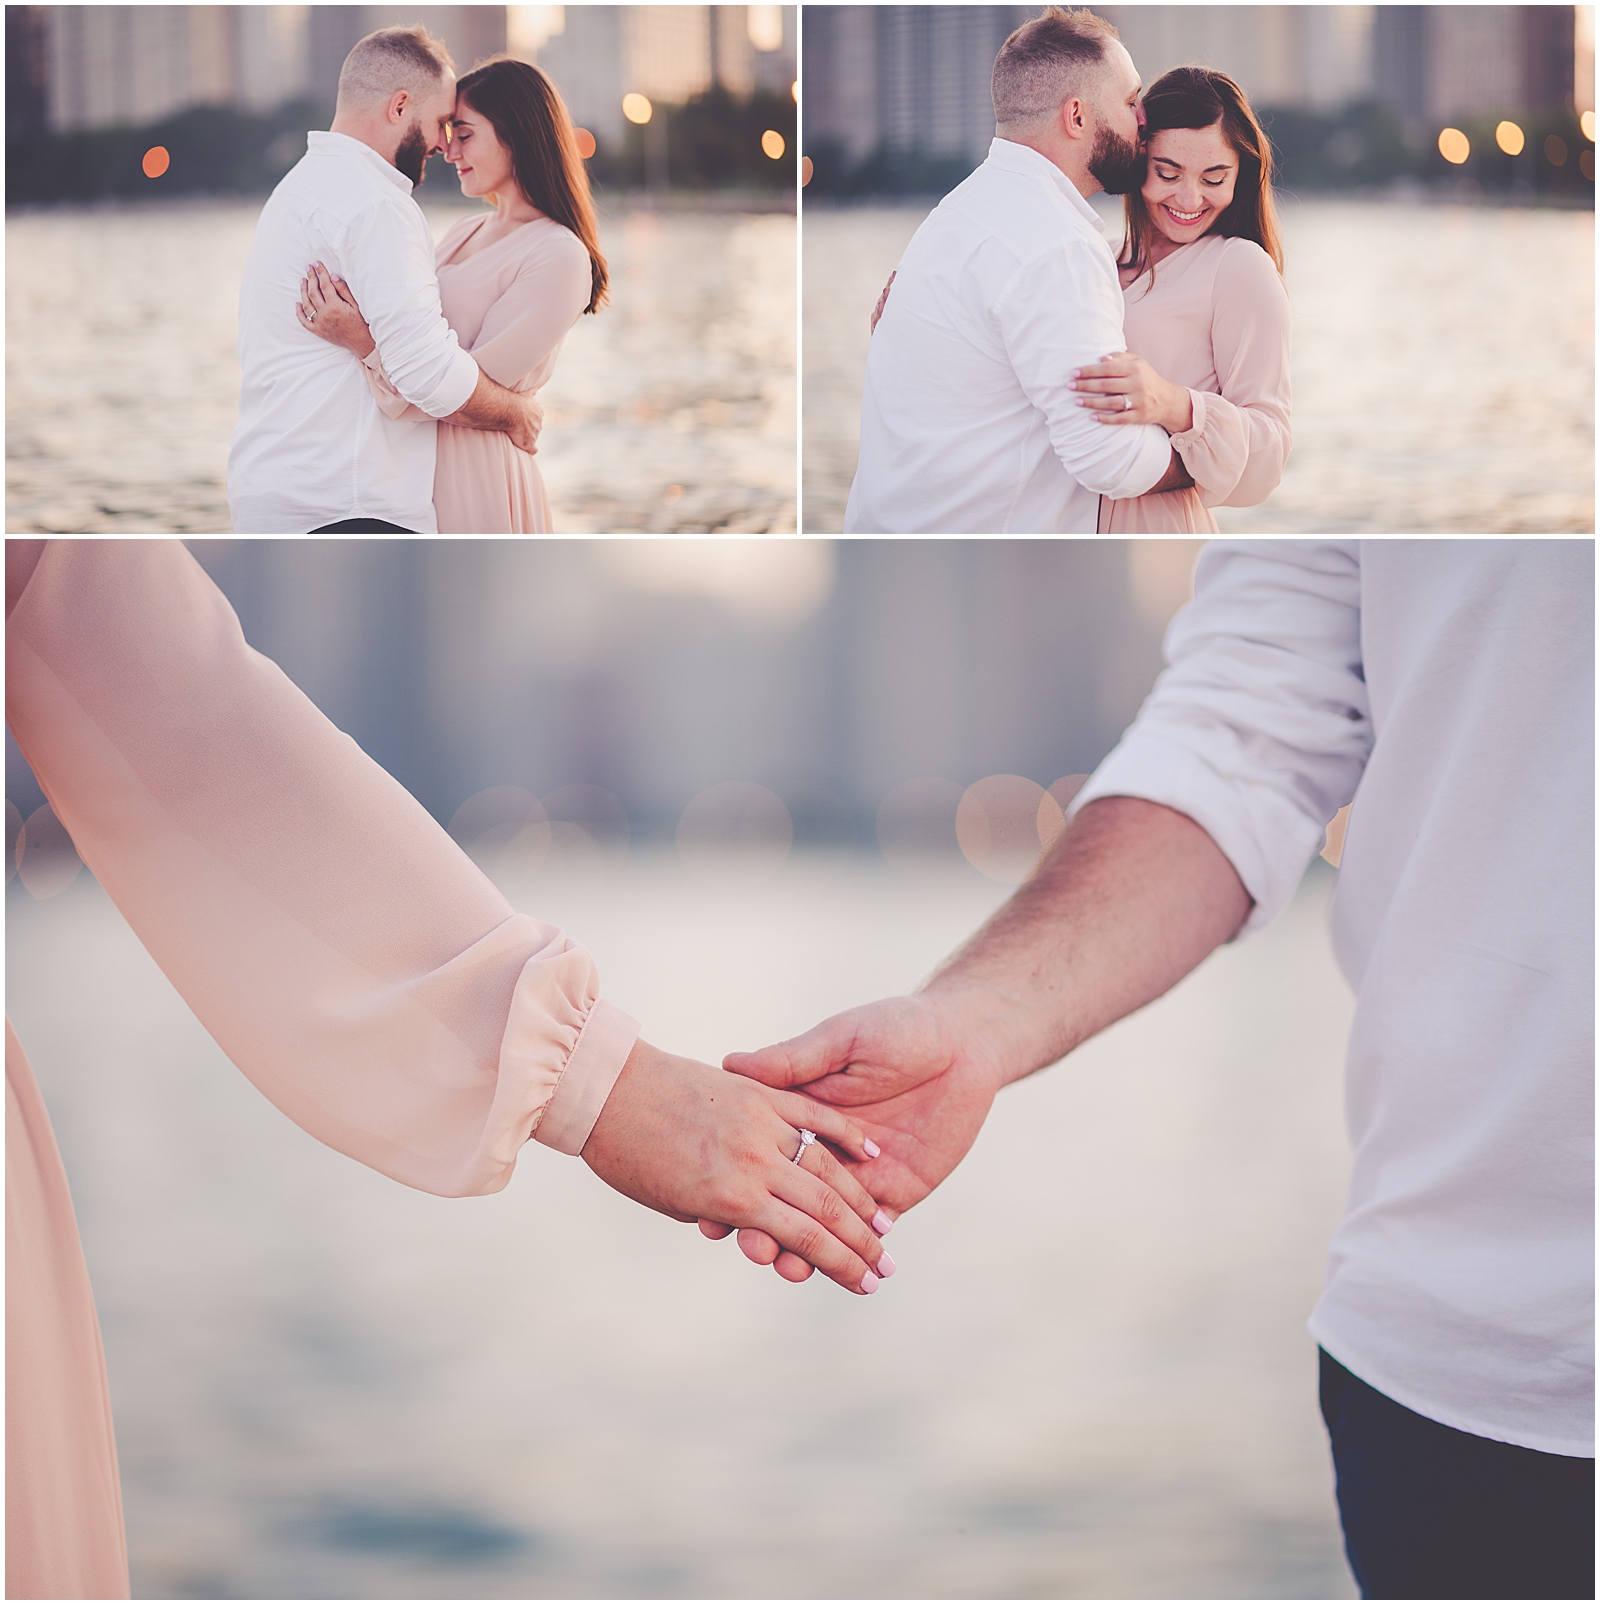 Colleen and Joel's North Avenue Beach engagement session in Chicago, Illinois with Chicagoland wedding photographer Kara Evans Photographer.